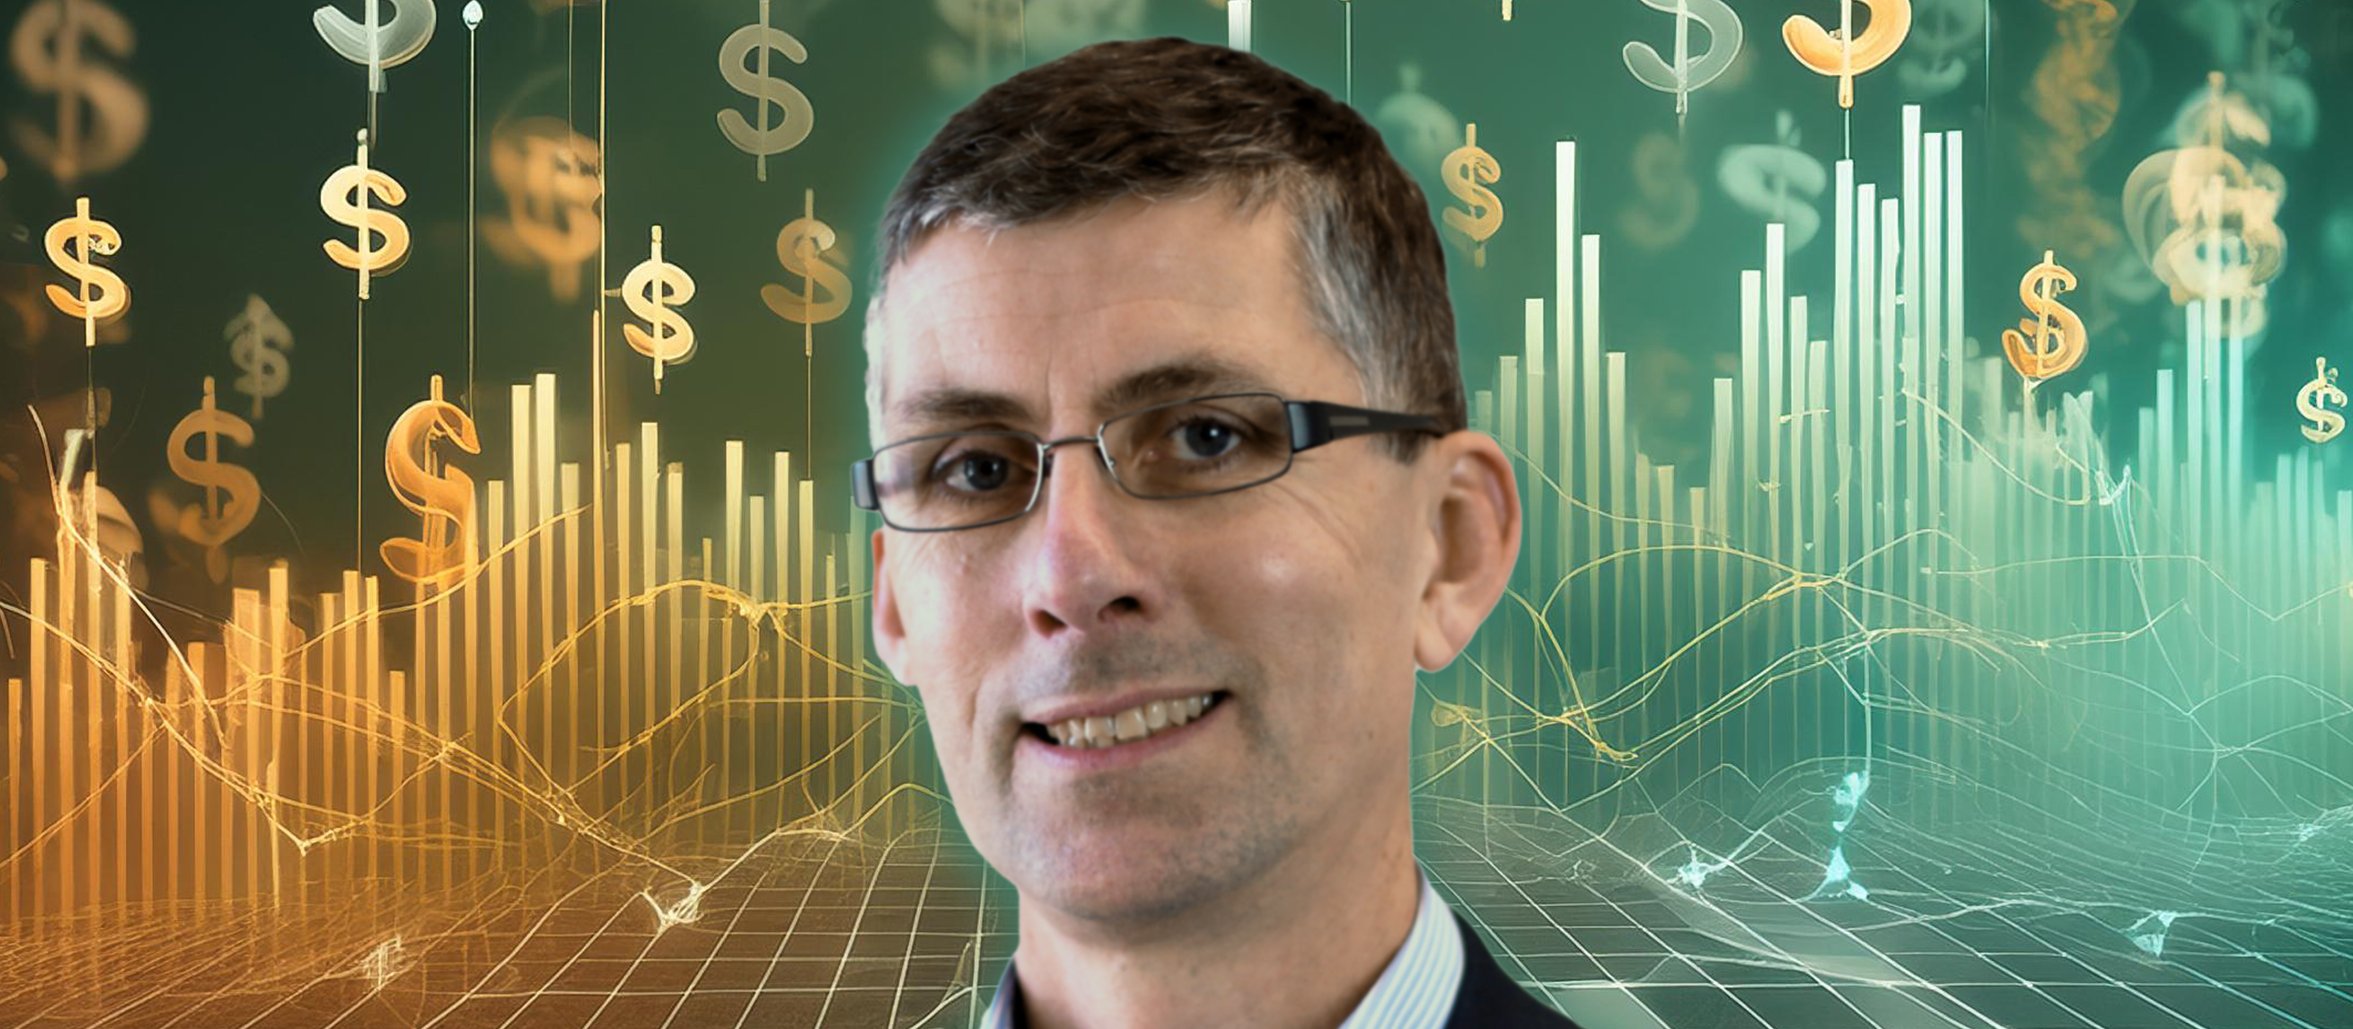 John Saywell finance background [Image: Supplied and edited with Firefly]